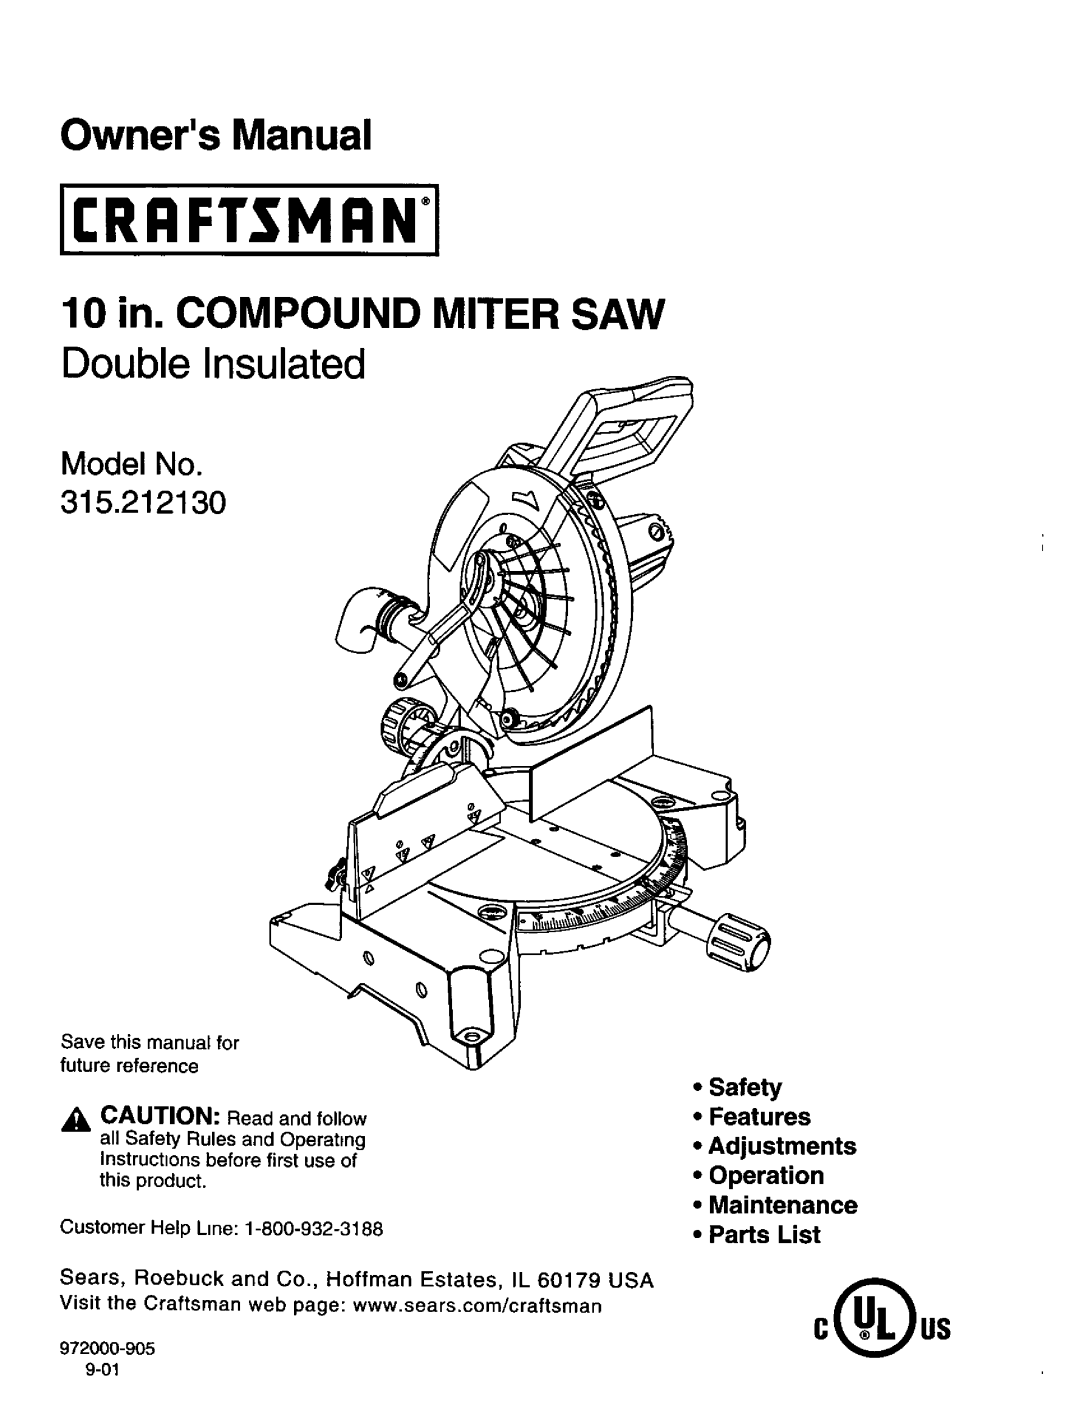 Craftsman manual Model No 315.212130, • Safety, Features, Adjustments, •Operation •Maintenance, •Parts List, 0 us 